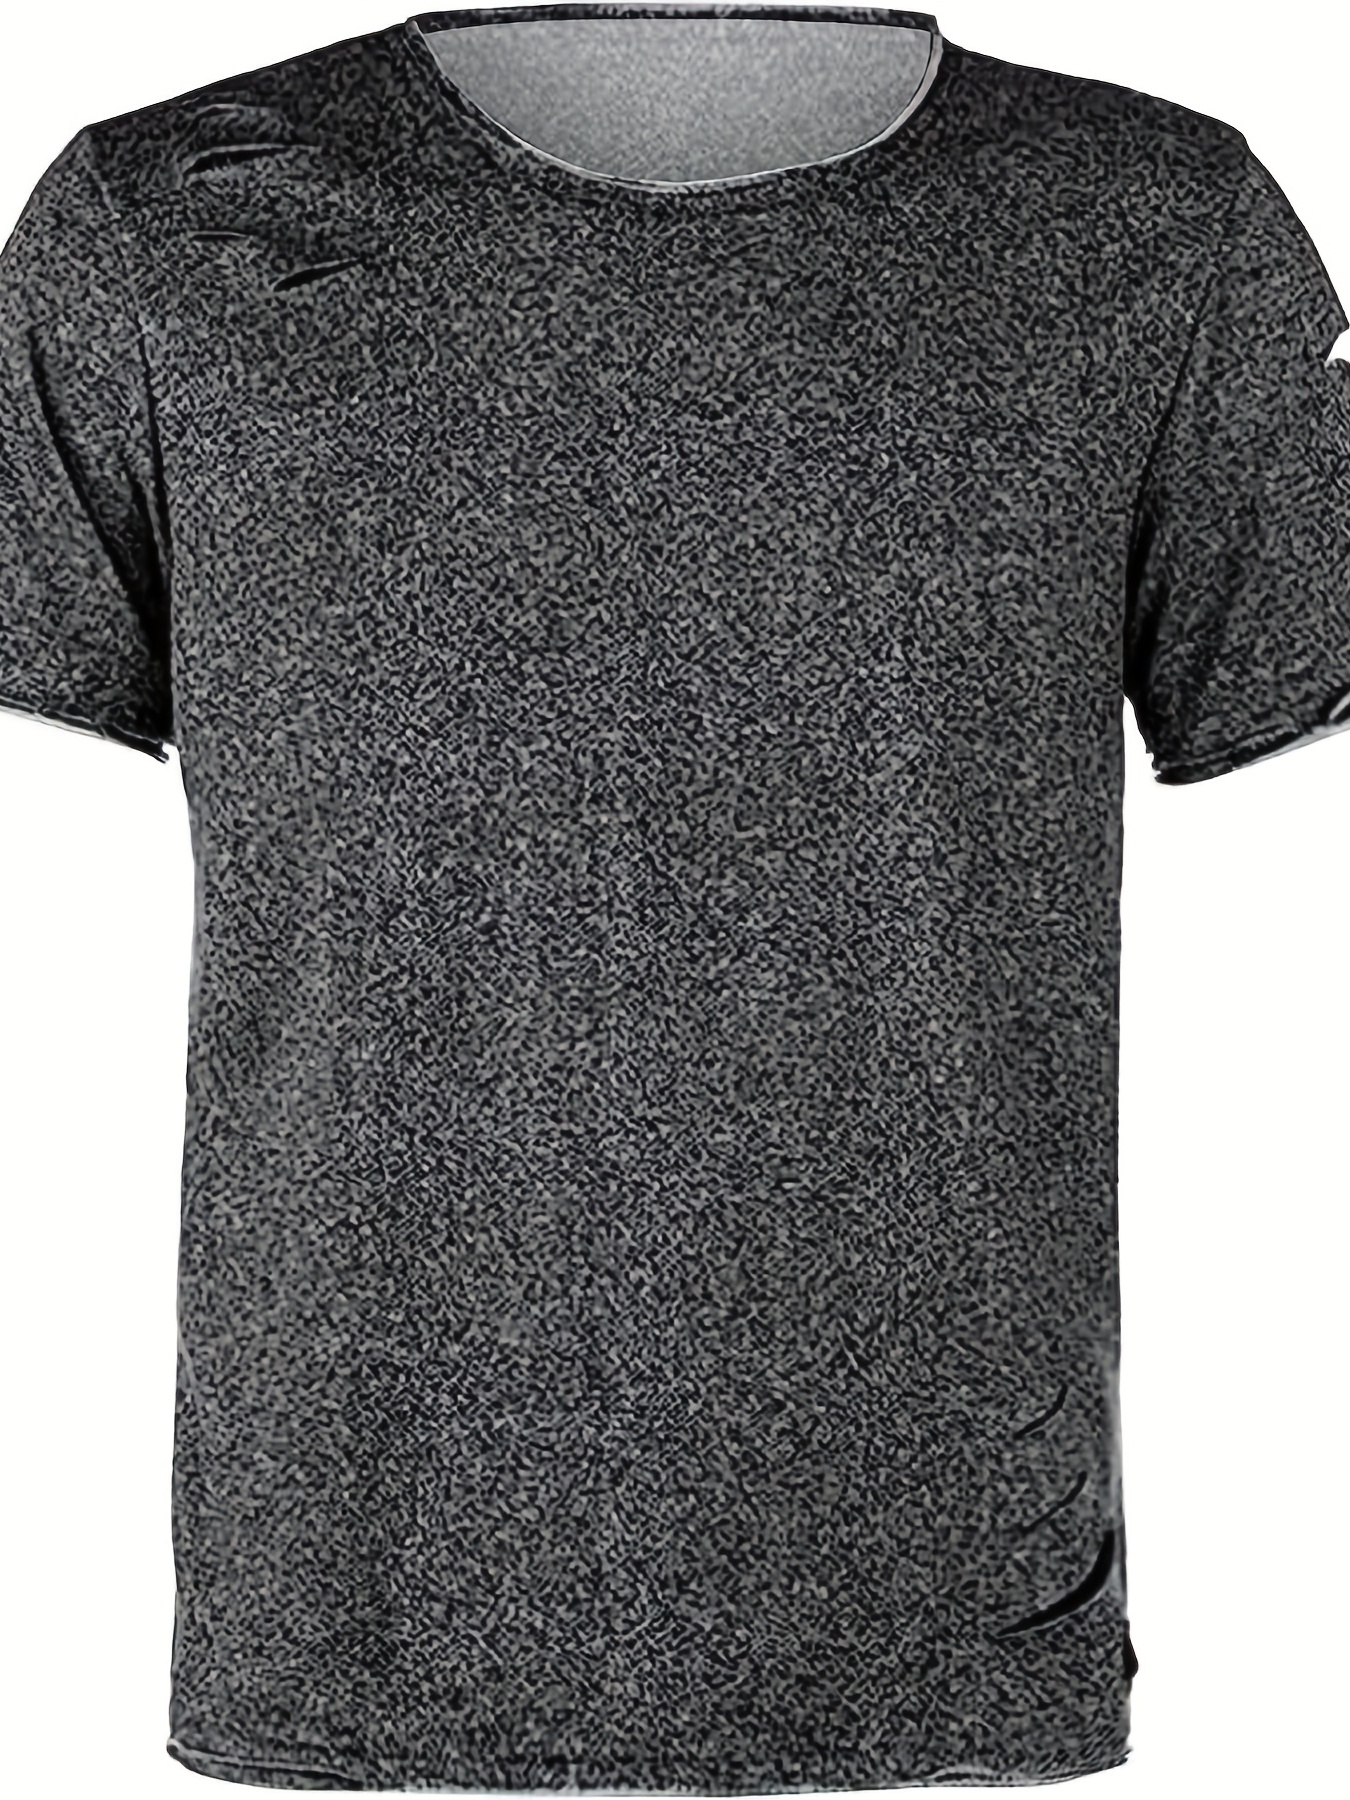 Brass Monkey Merino Mens Short Sleeve Crew Neck Thermal Top - The Tin Shed